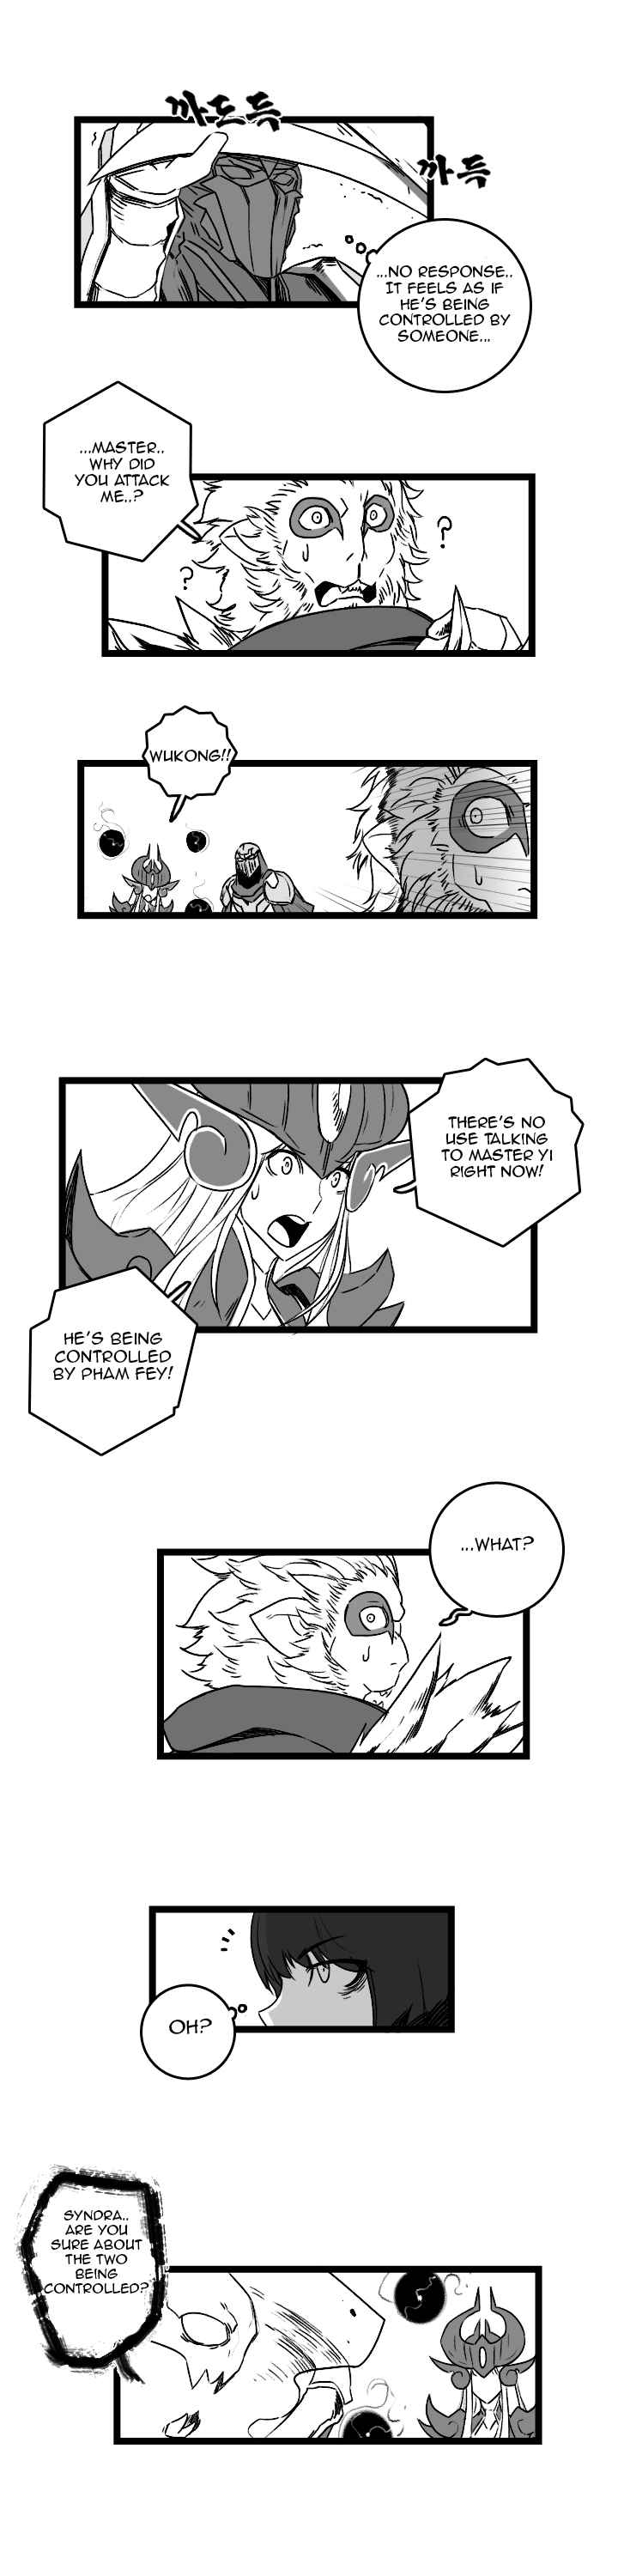 League of Legends Syndra & Zed's Everyday Life (Doujinshi) Vol. 3 Ch. 39